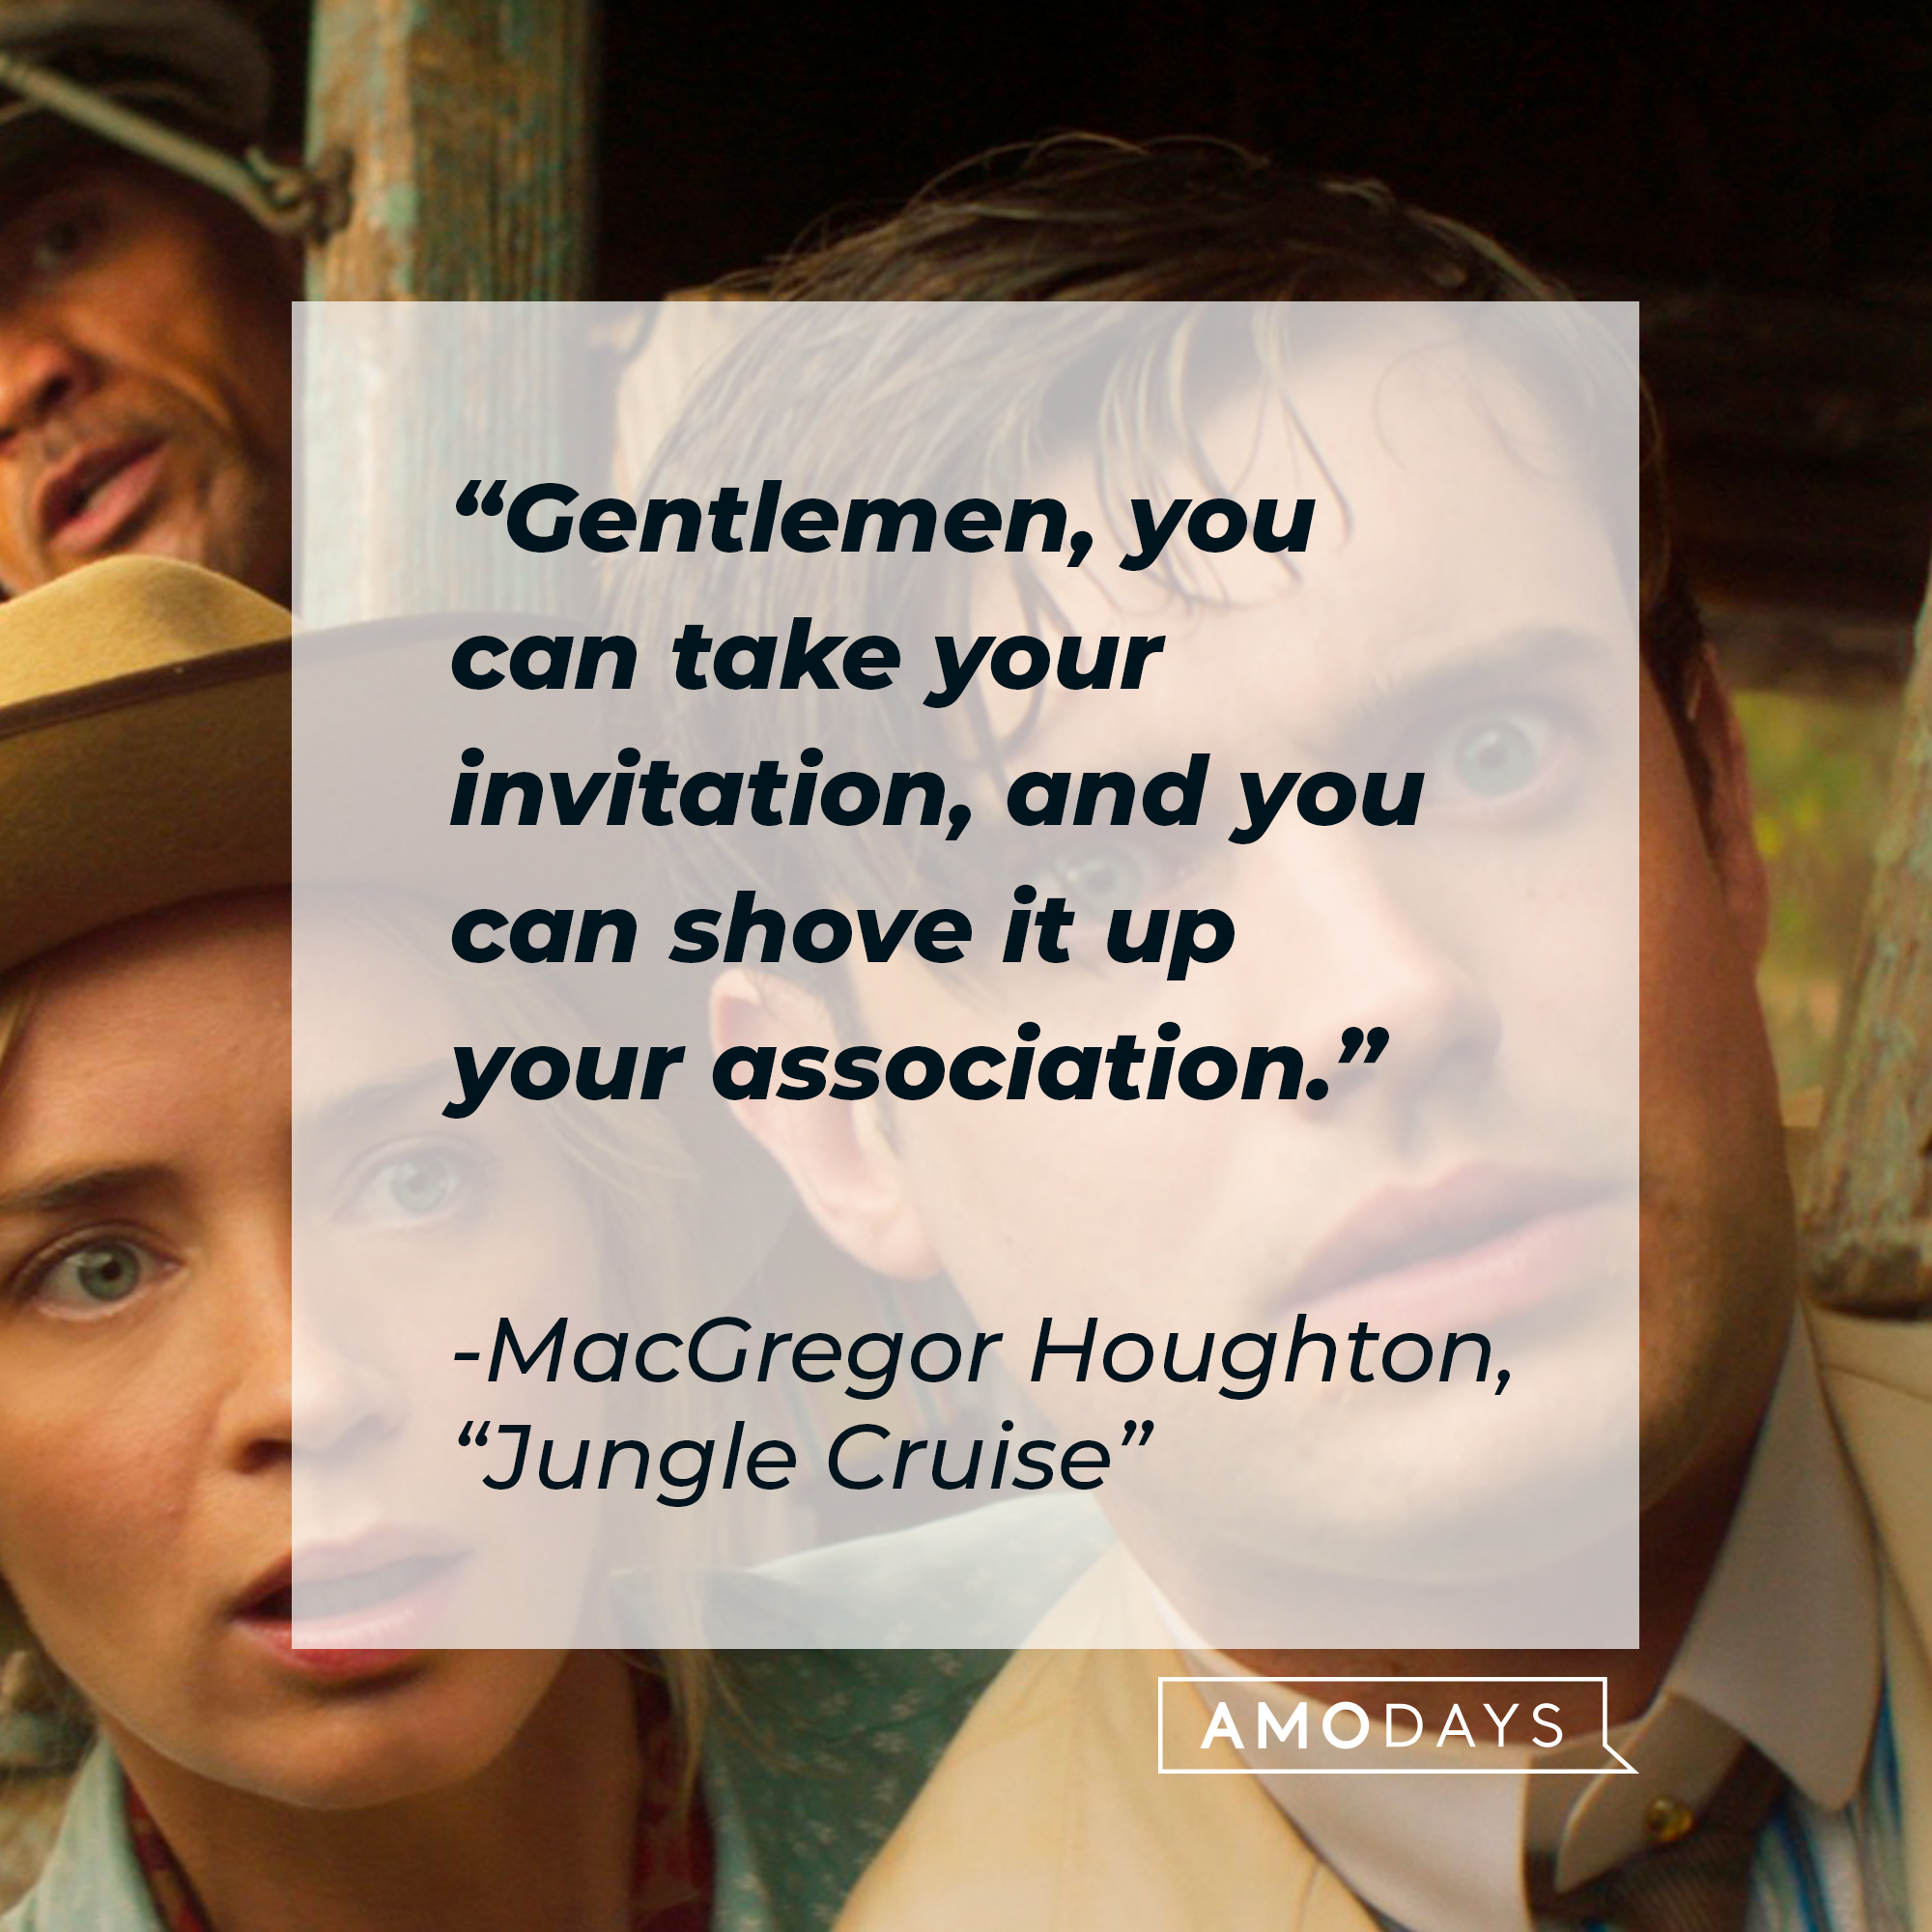 MacGregor Houghton’s quote:  "Gentlemen, you can take your invitation, and you can shove it up your association." | Image: facebook.com/JungleCruise